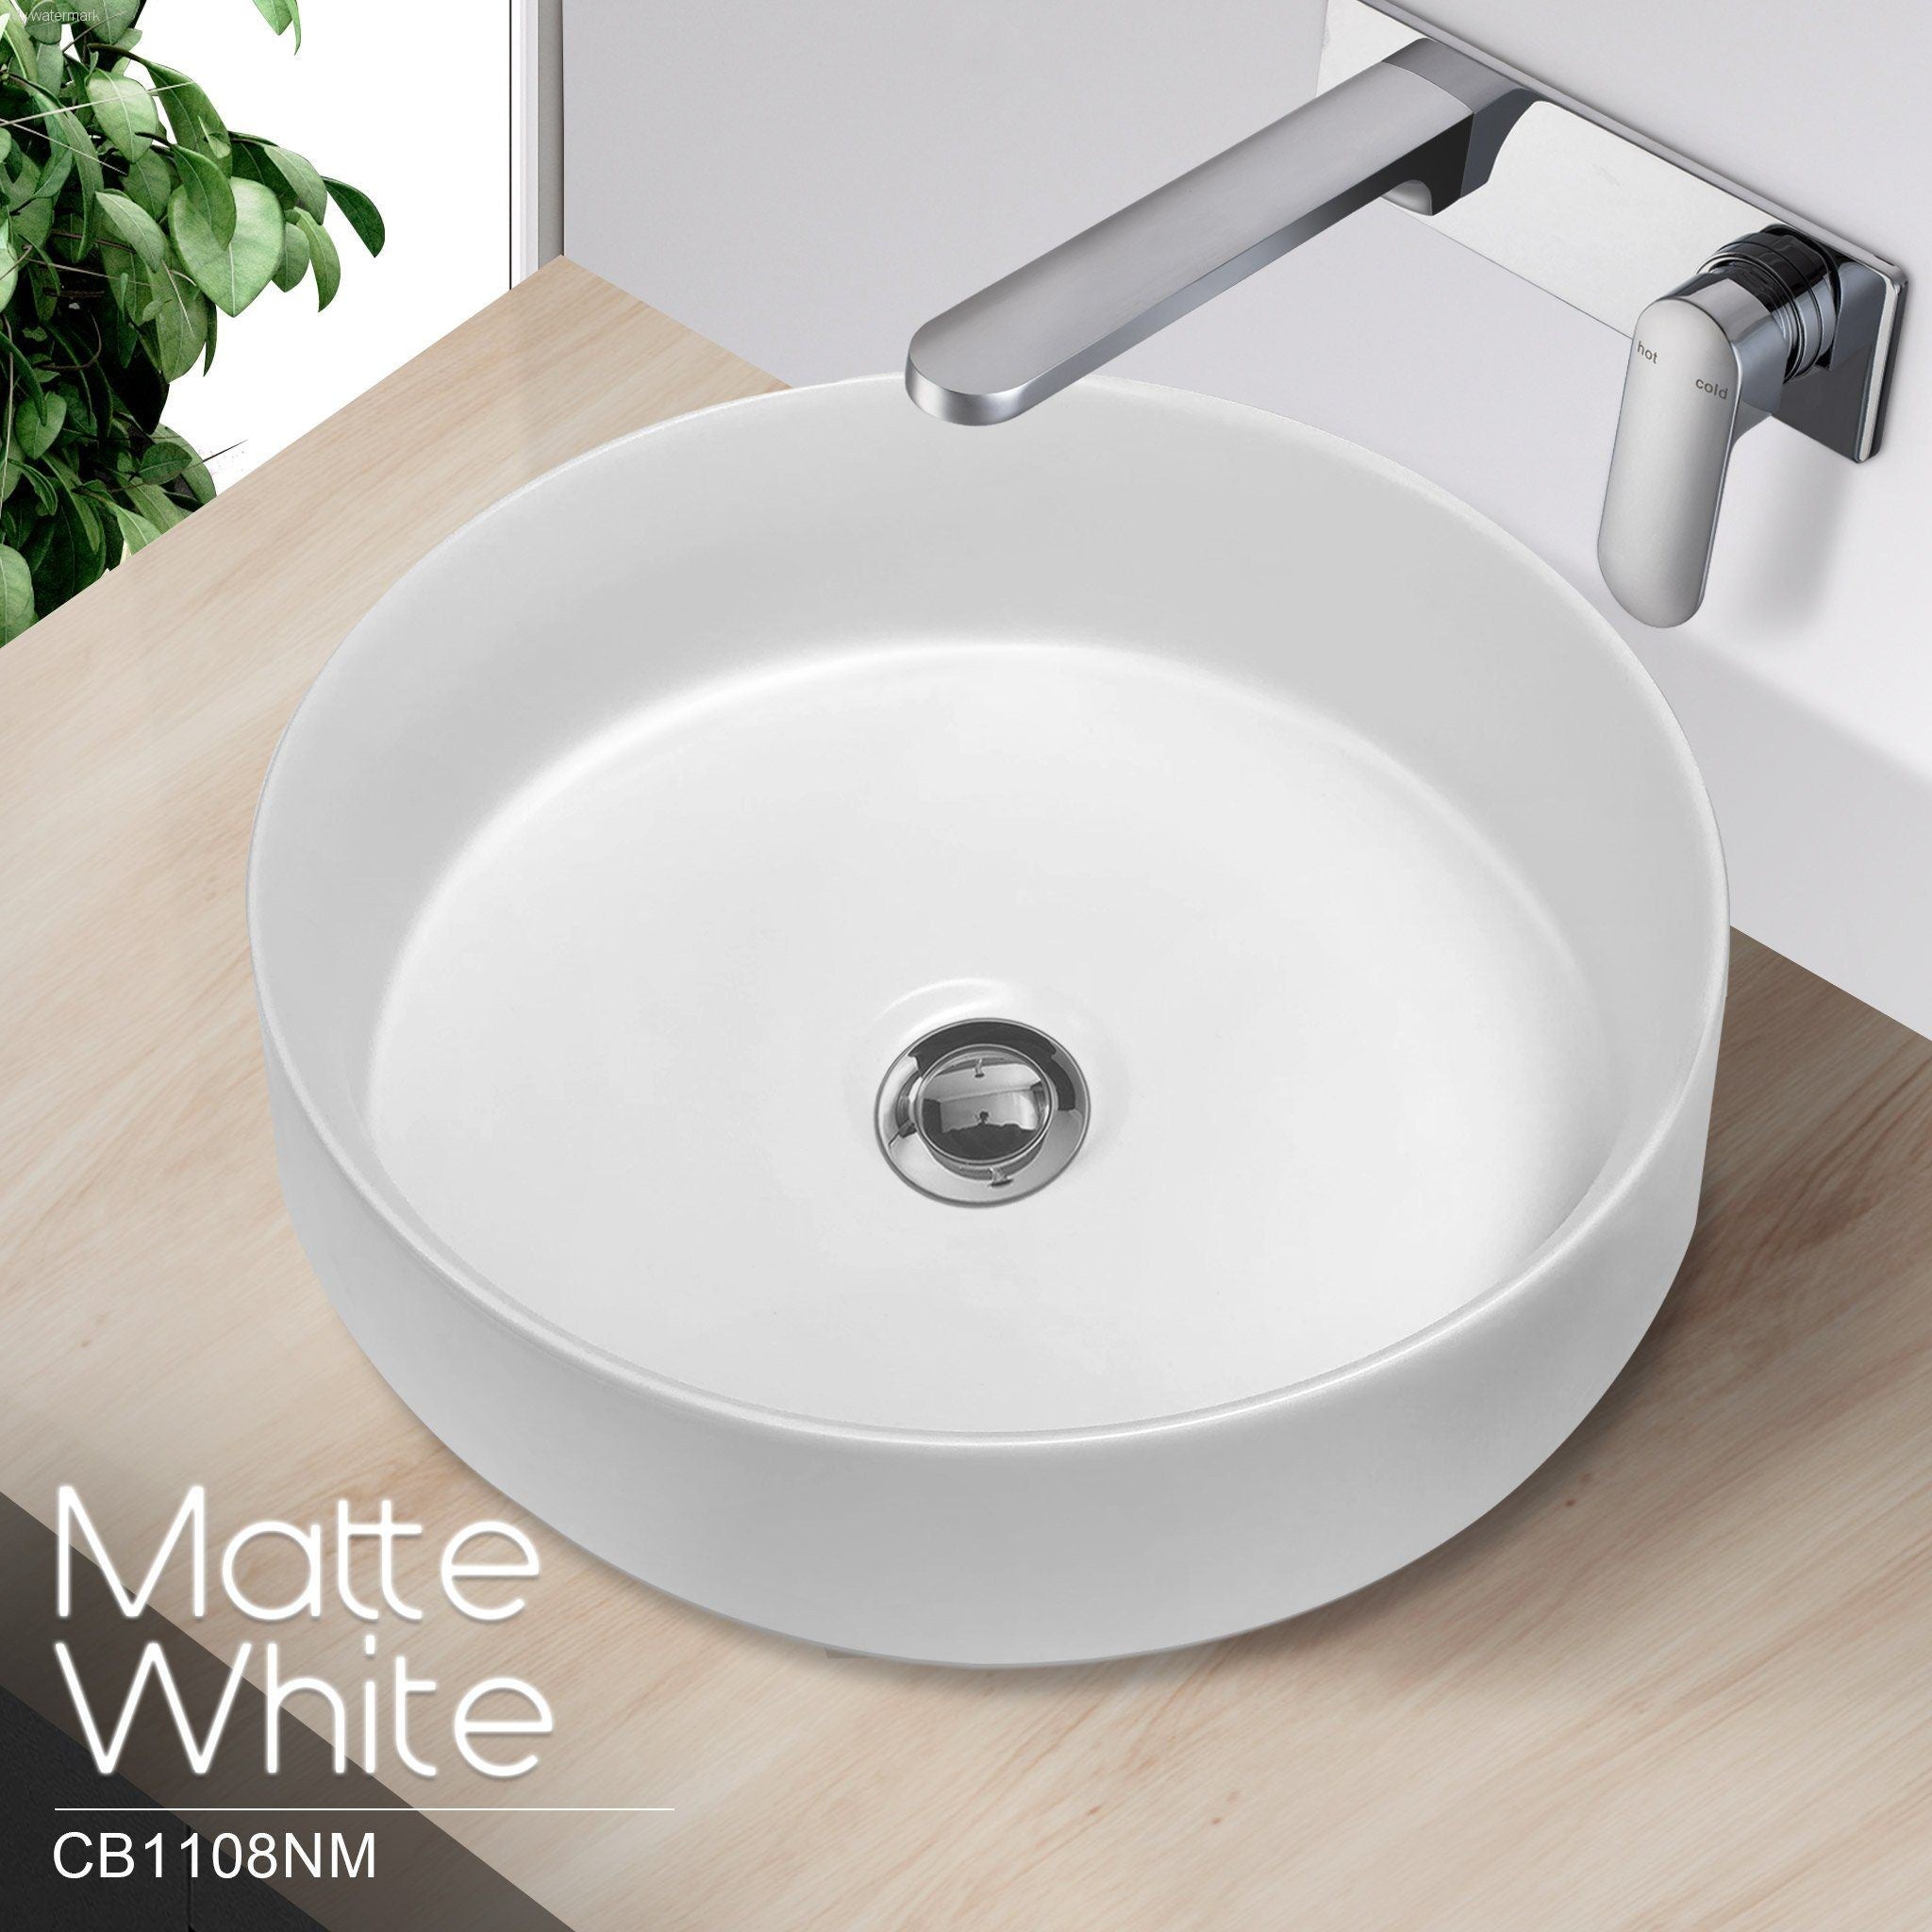 120cm Wall Hung Double Bowl Vanity